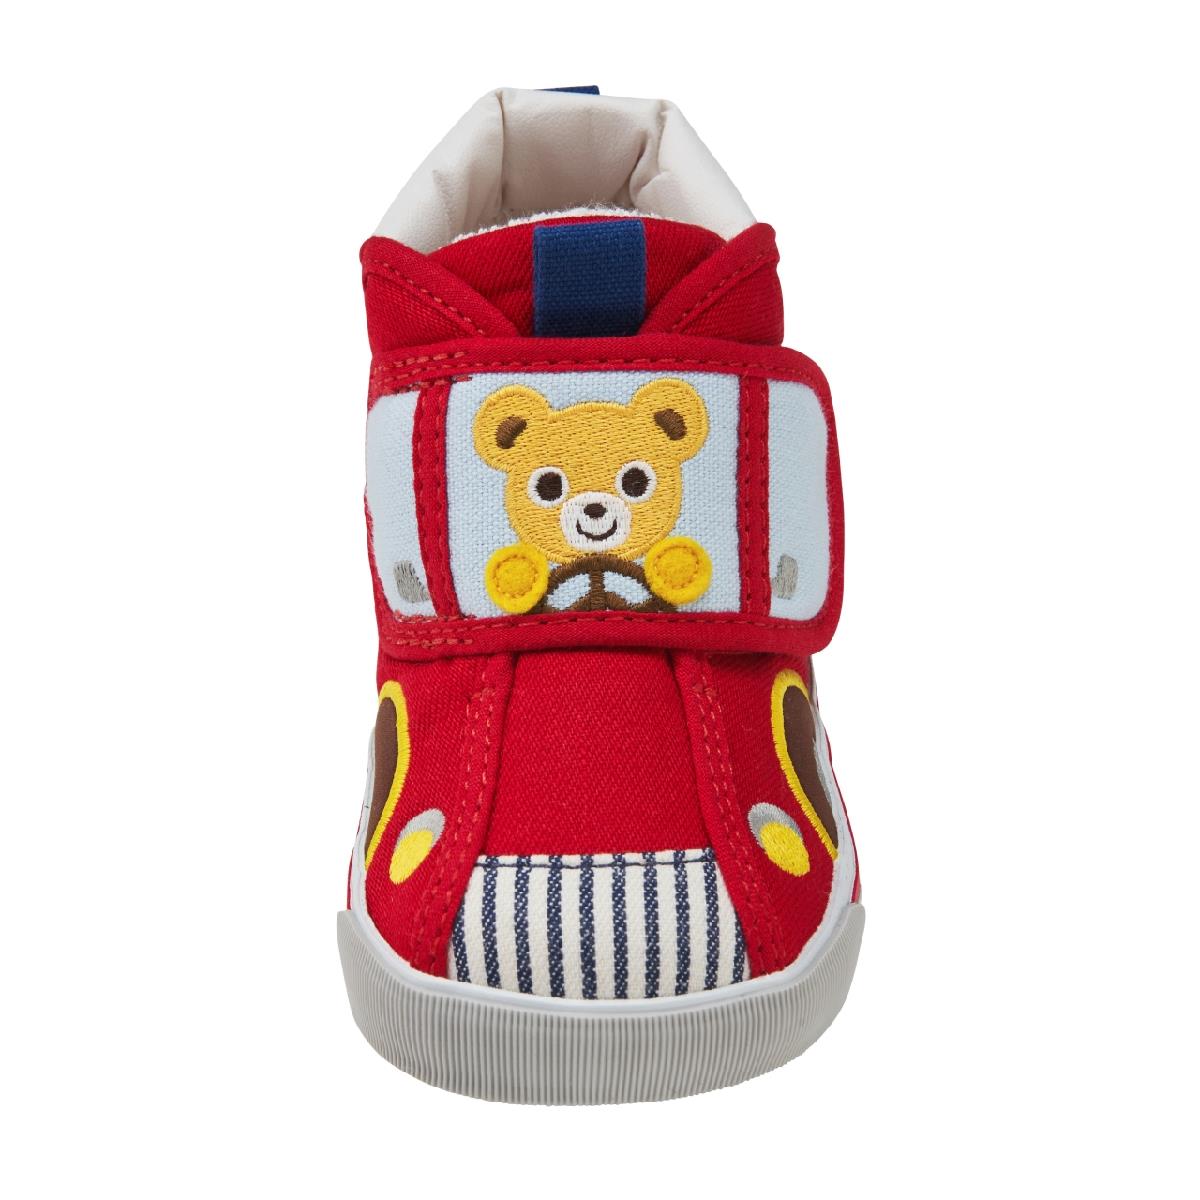 Driving Bear Second Shoes - 11-9303-825-02-13